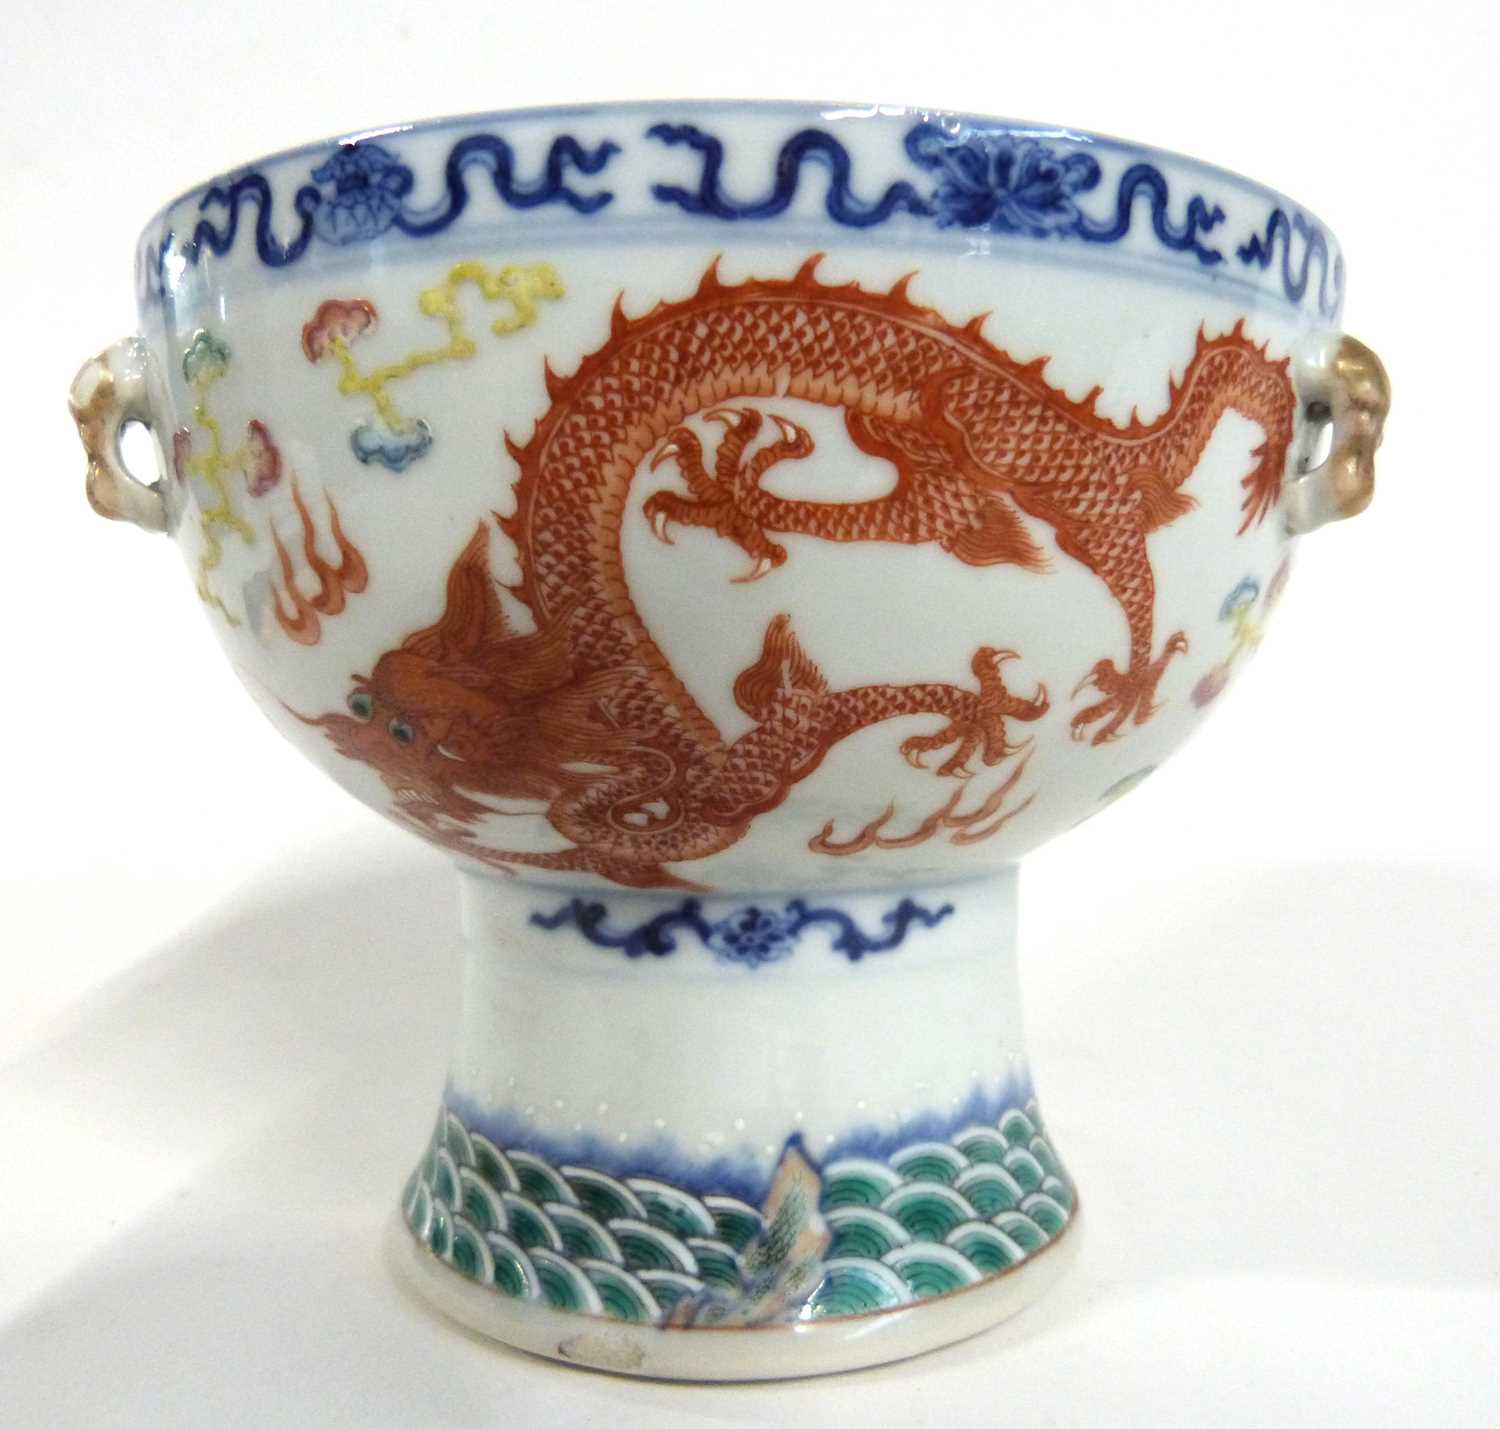 Chinese porcelain stem vase with decoration in iron red of a dragon chasing the flaming pearl